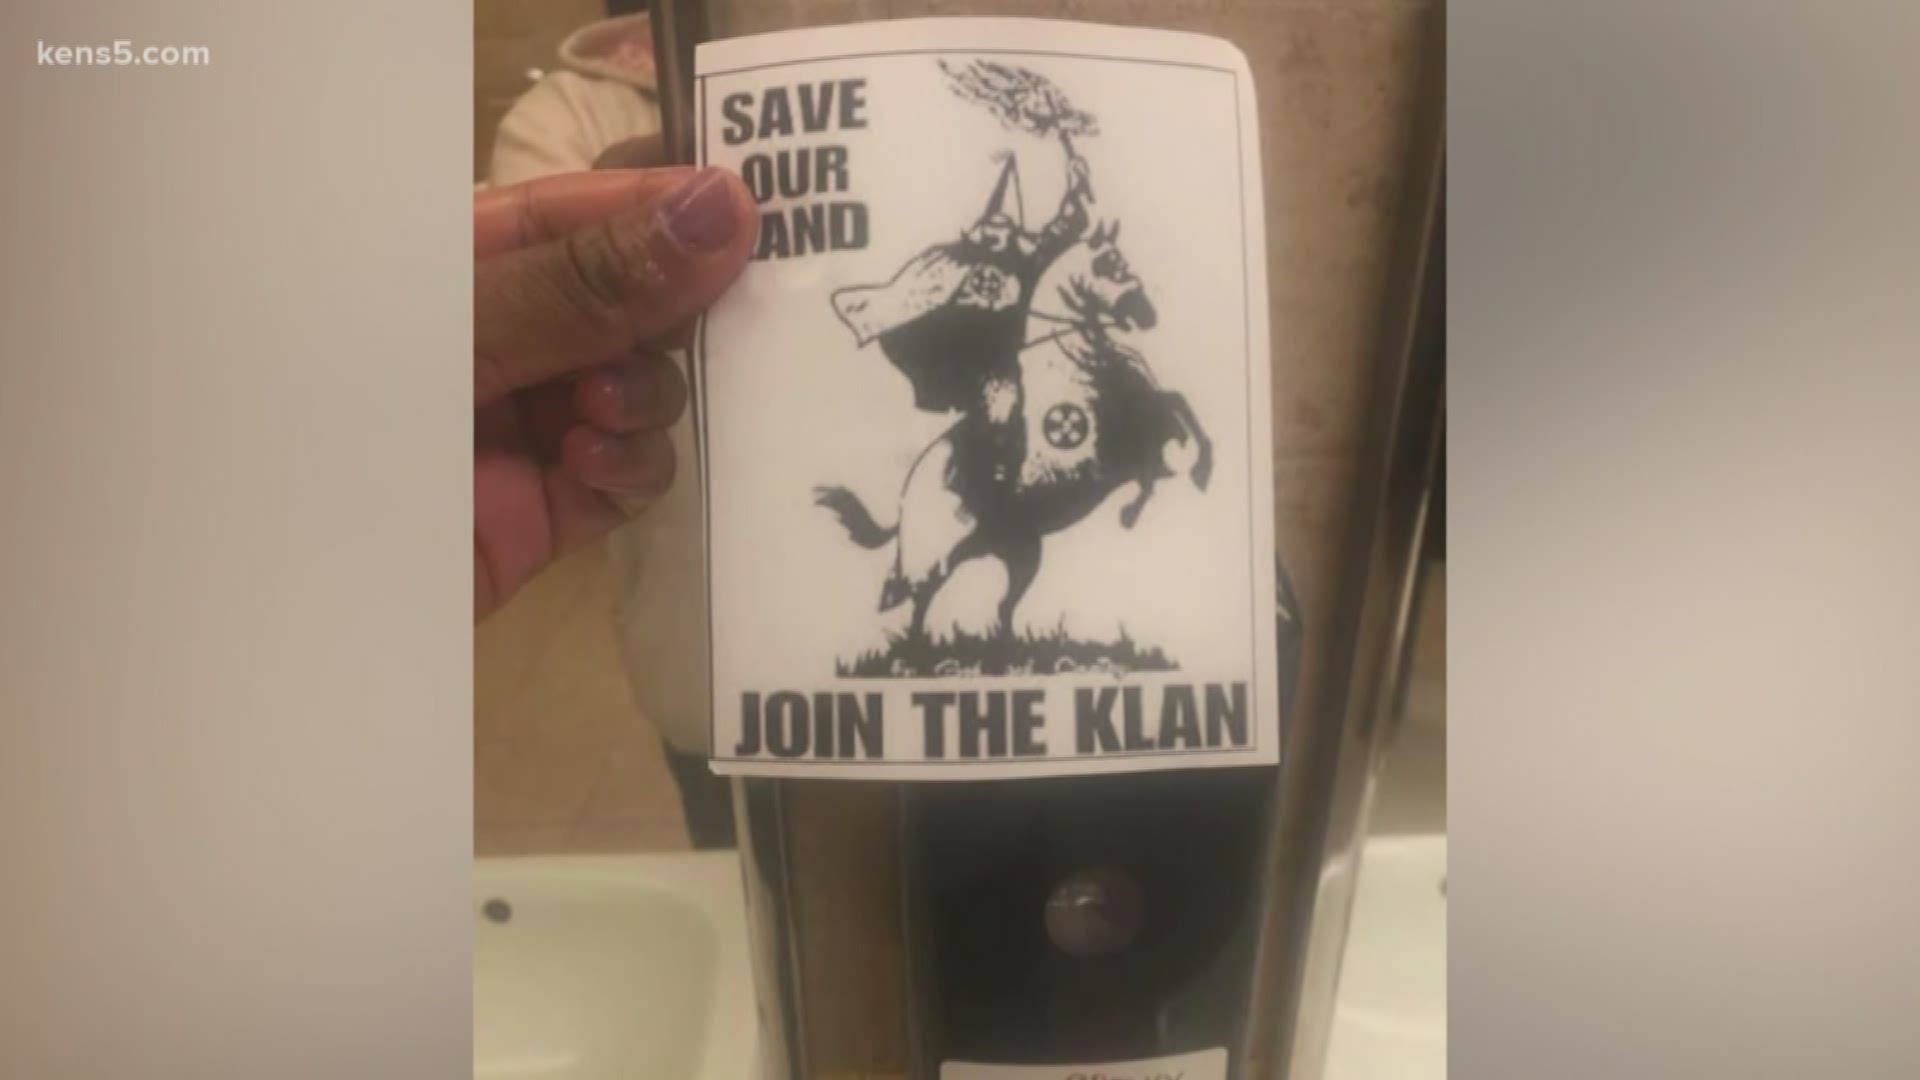 School officials say they plan to punish whoever posted the flyers.